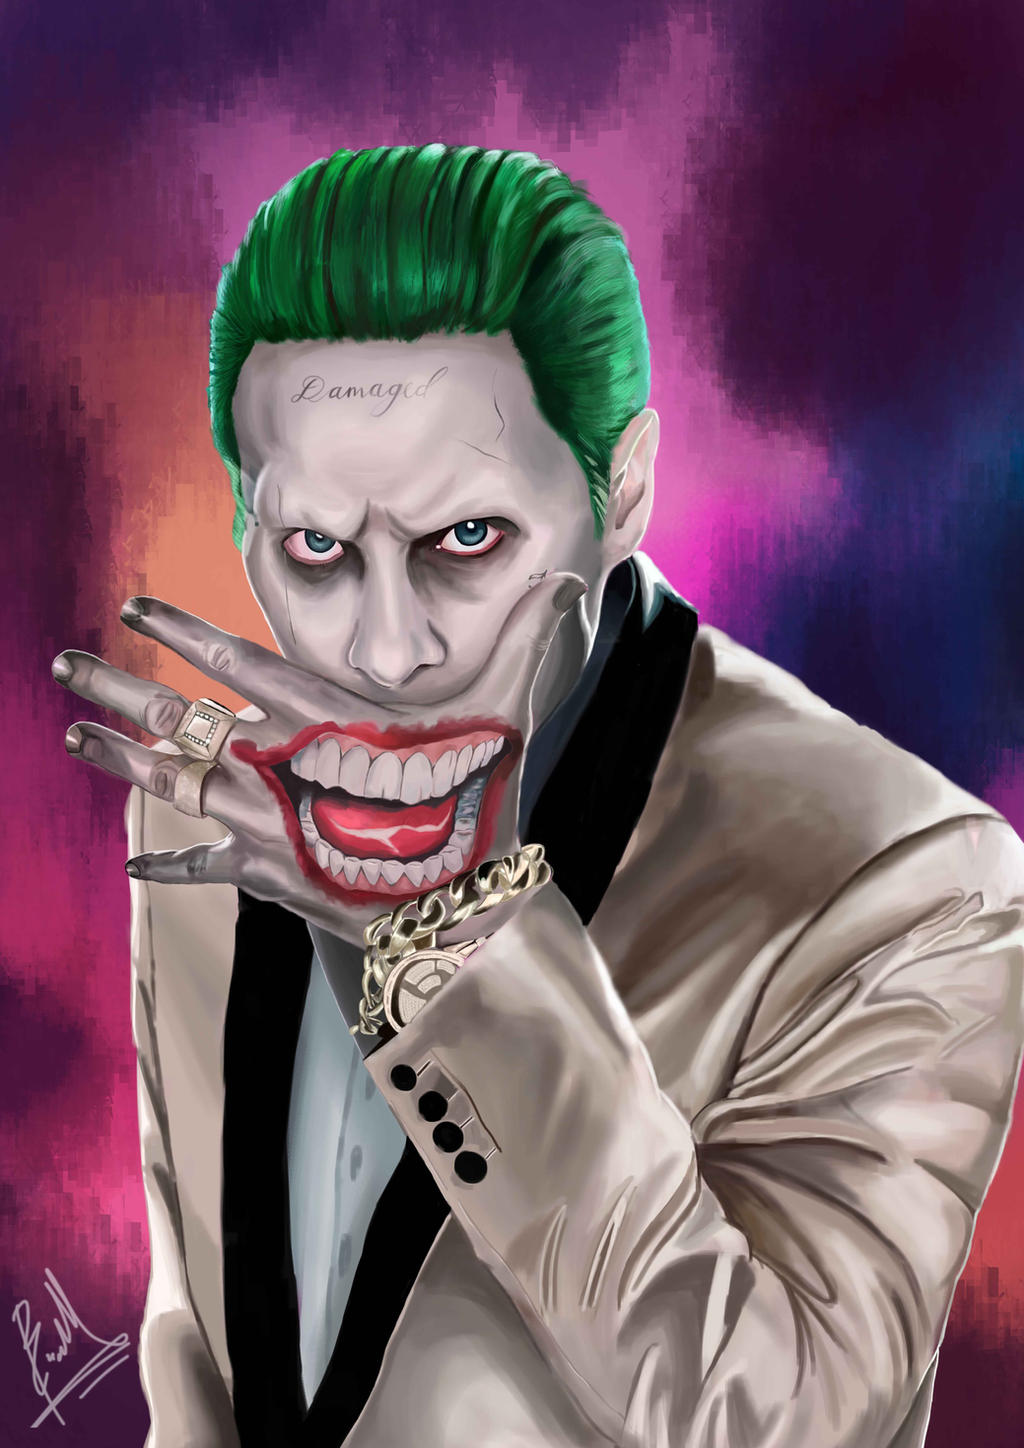 The Joker (Jared Leto) Digital Painting by brianmarianto on DeviantArt